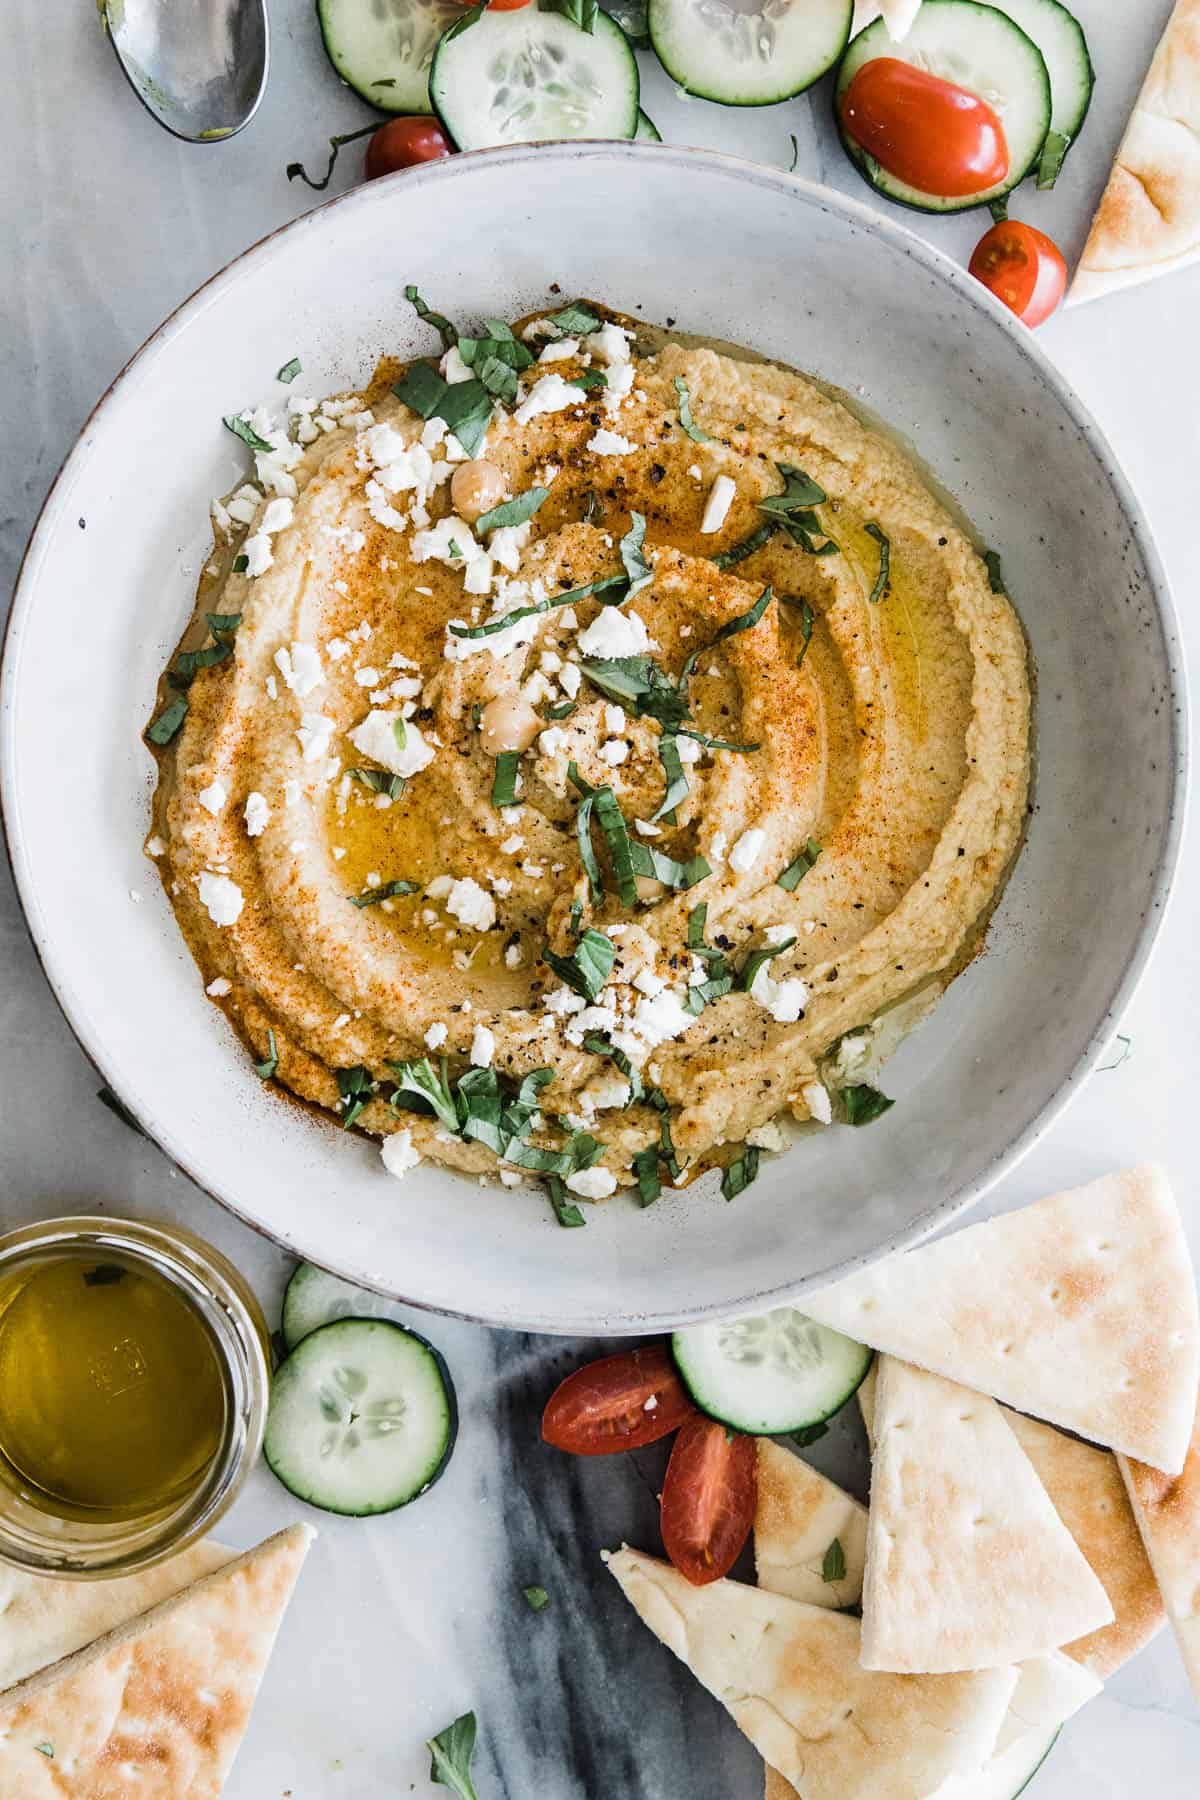 A bowl of easy hummus on the table topped with olive oil, black pepper, cheese, and herbs.